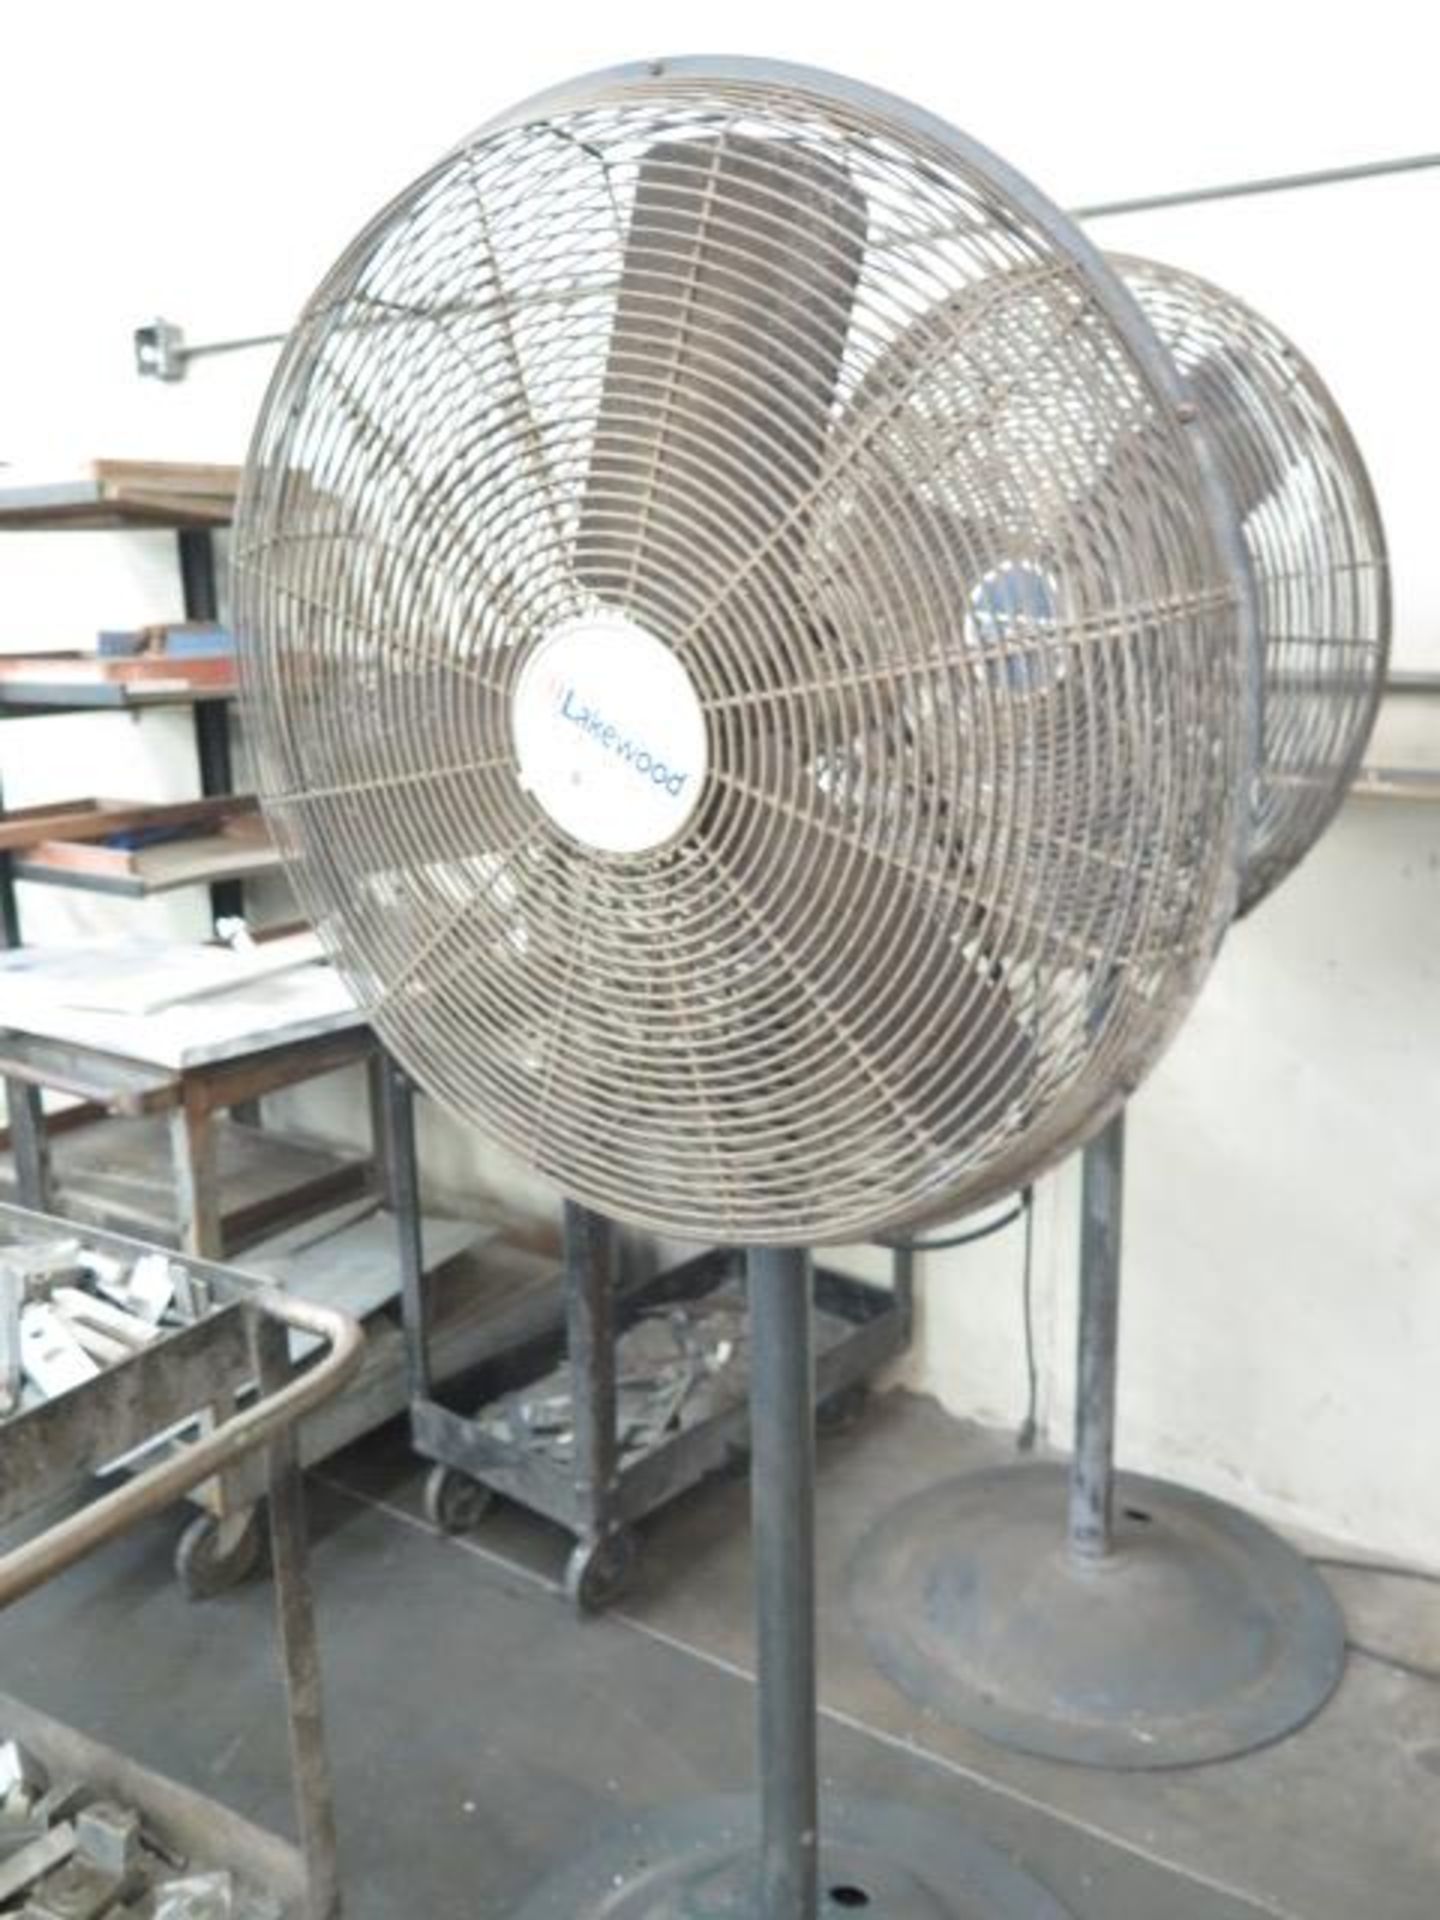 Shop Fans (4) (SOLD AS-IS - NO WARRANTY) - Image 4 of 5